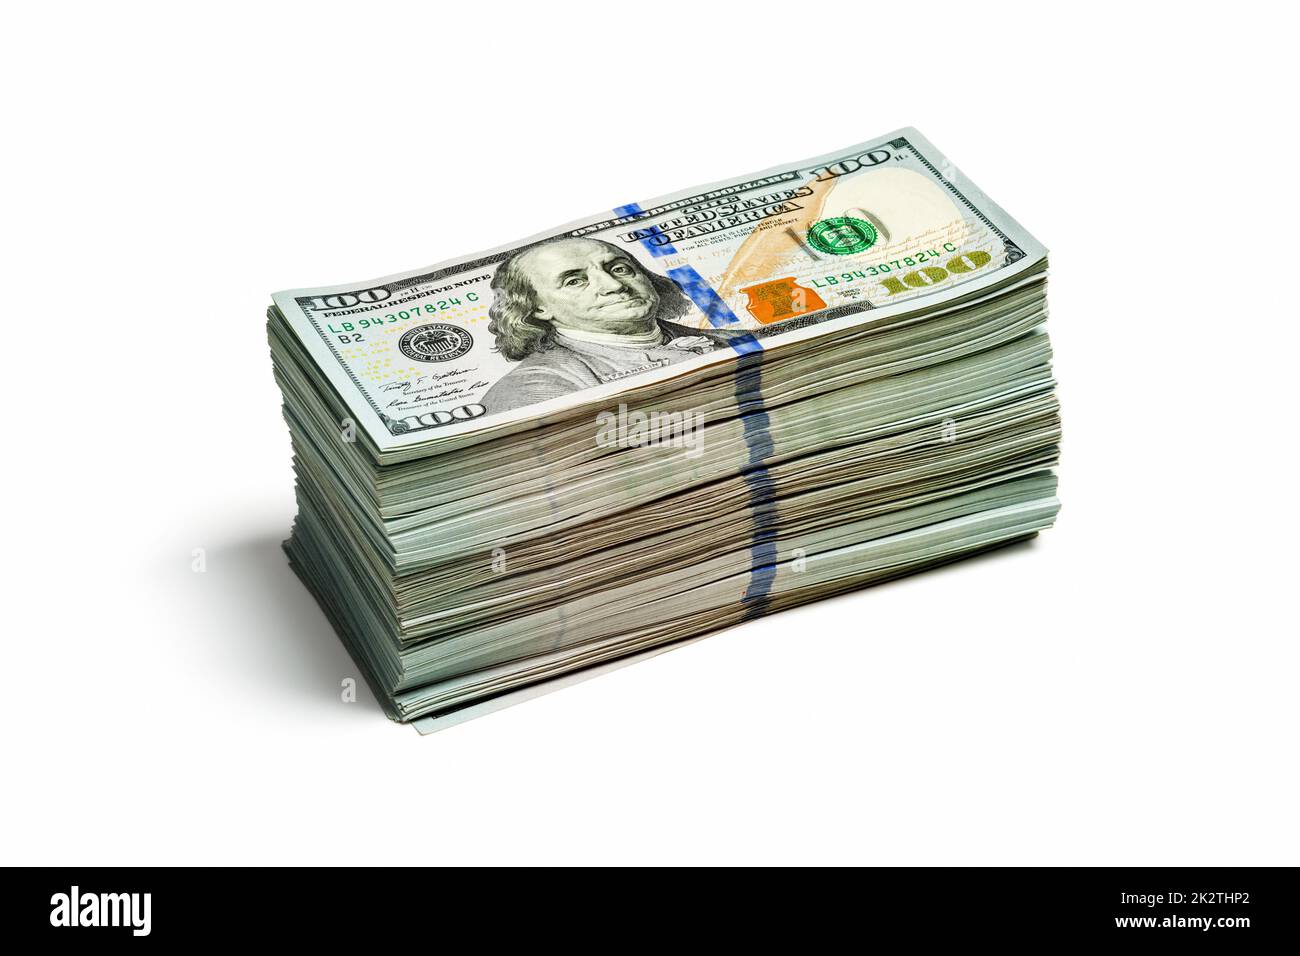 Stack of new 100 US dollars 2013 edition banknote Stock Photo